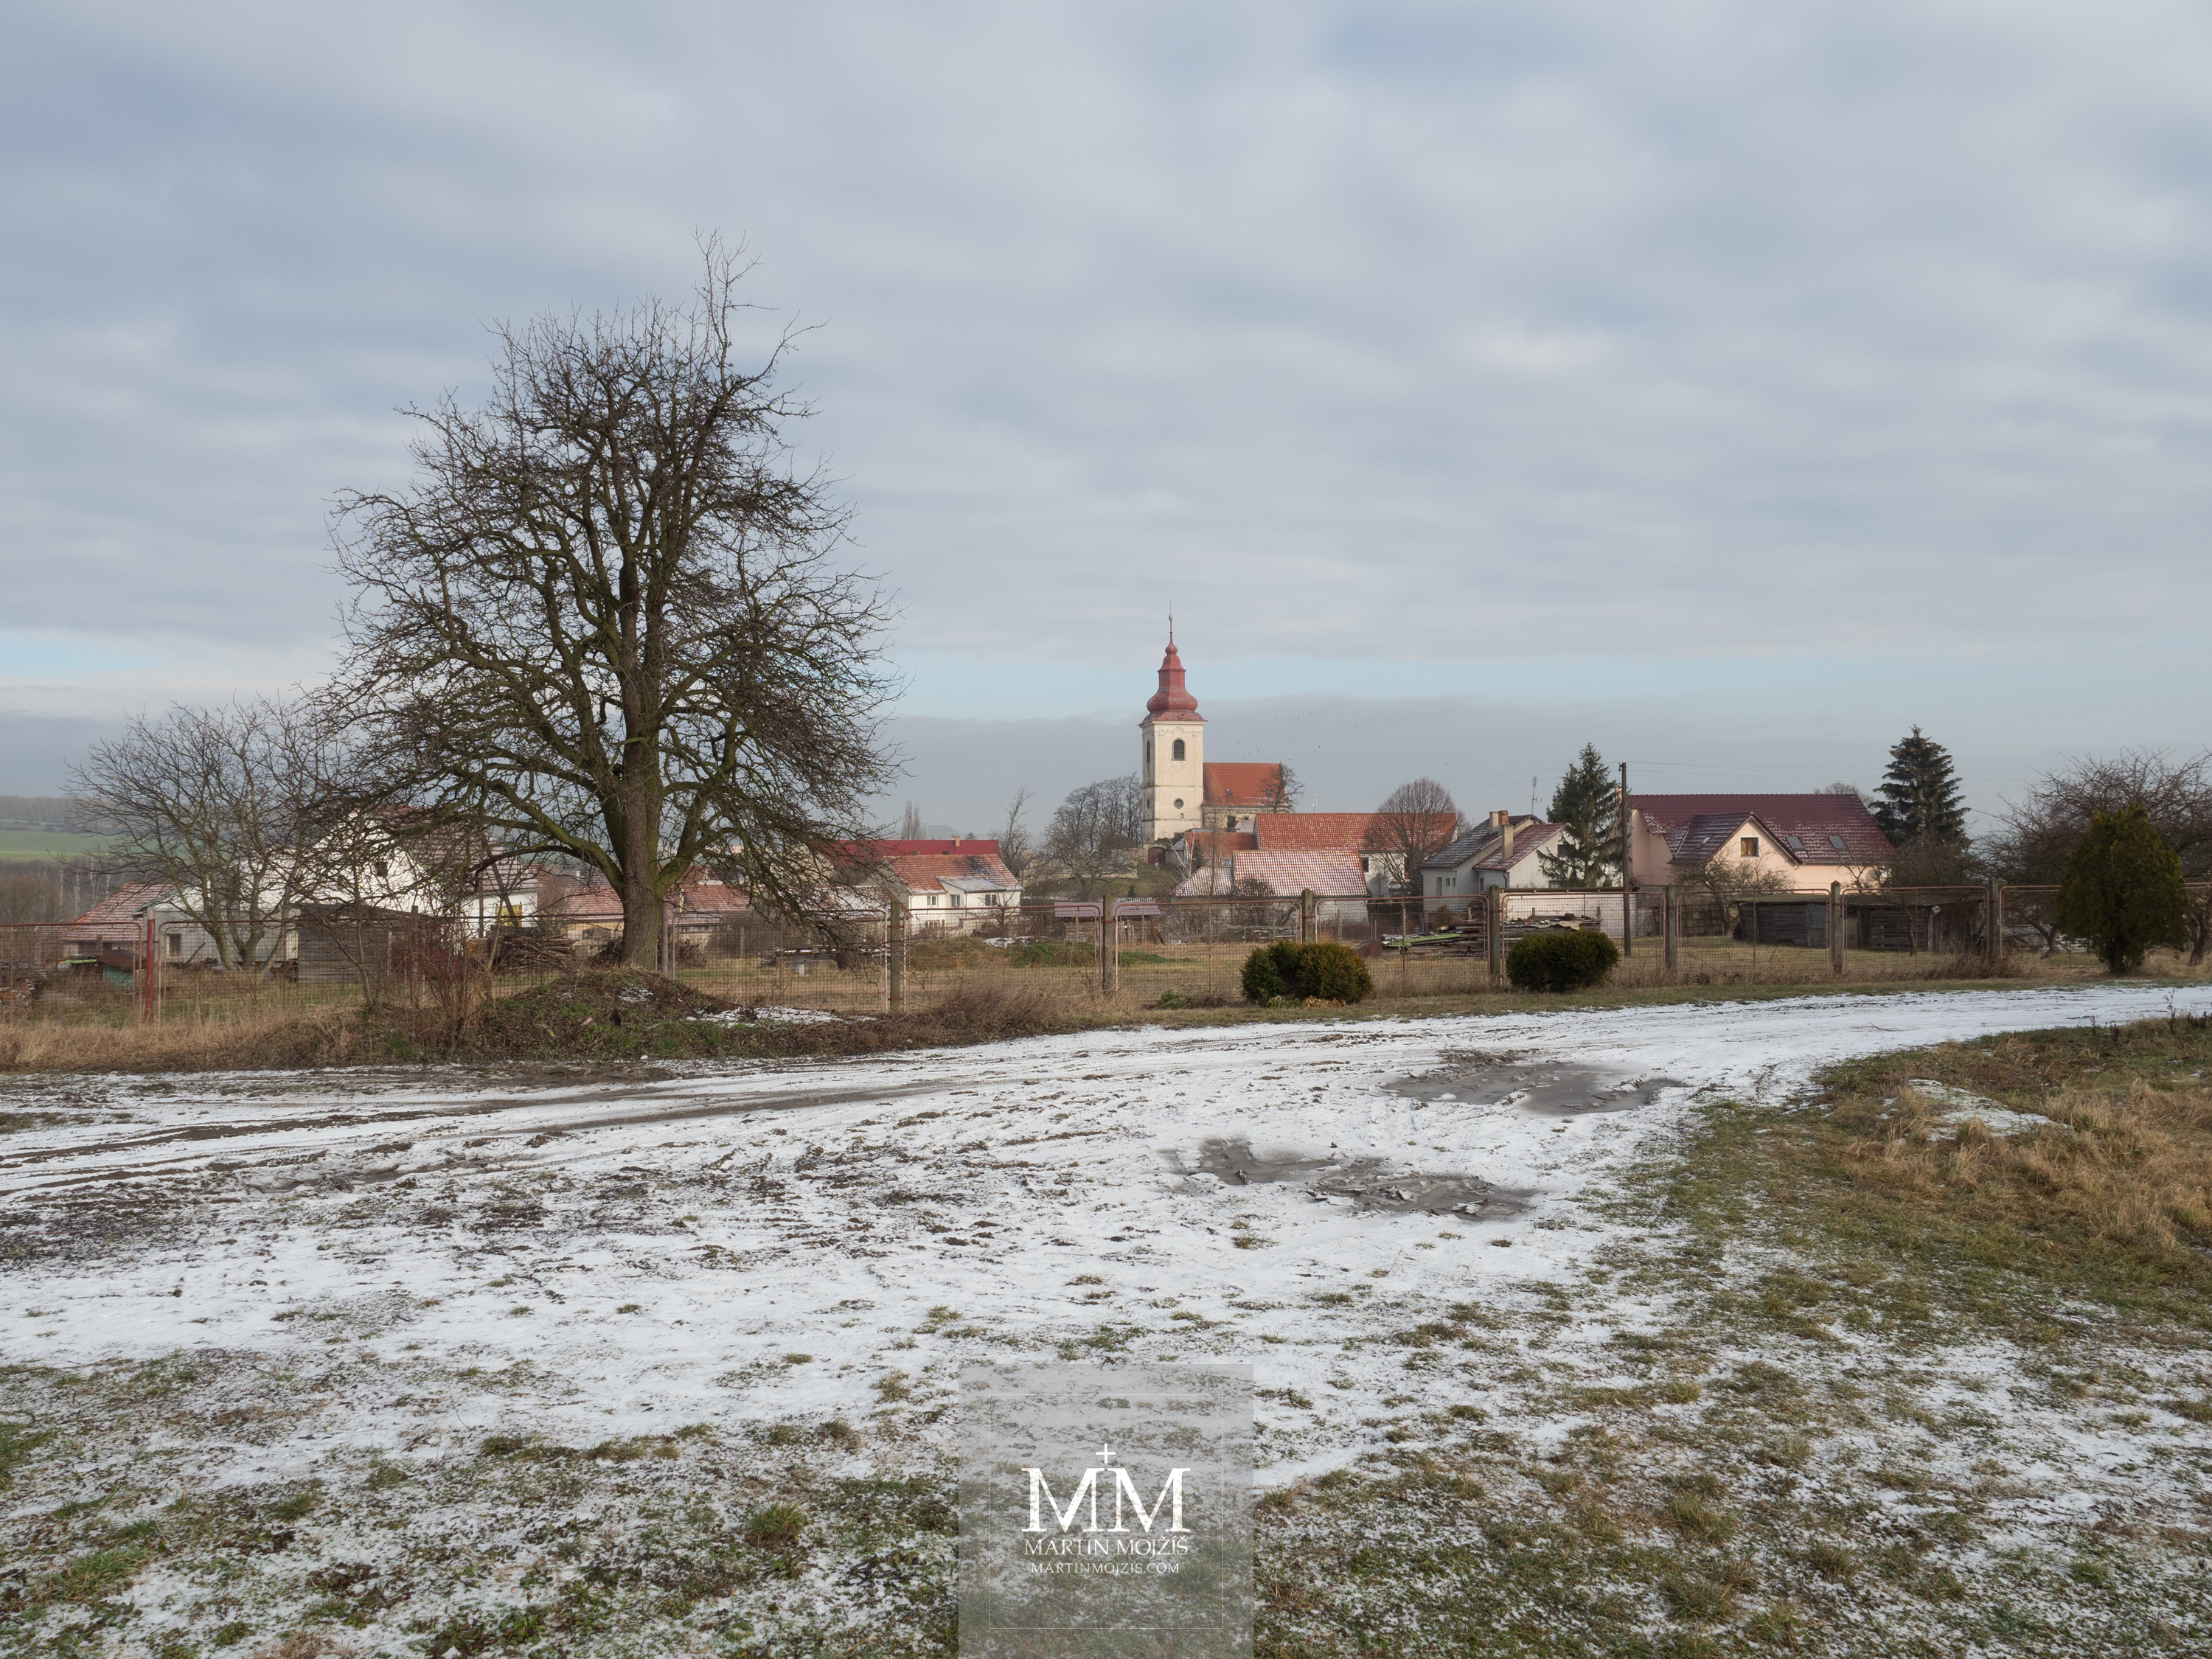 Village in winter, church in the background. Photograph created with Olympus 12 - 40 mm 2.8 Pro lens.